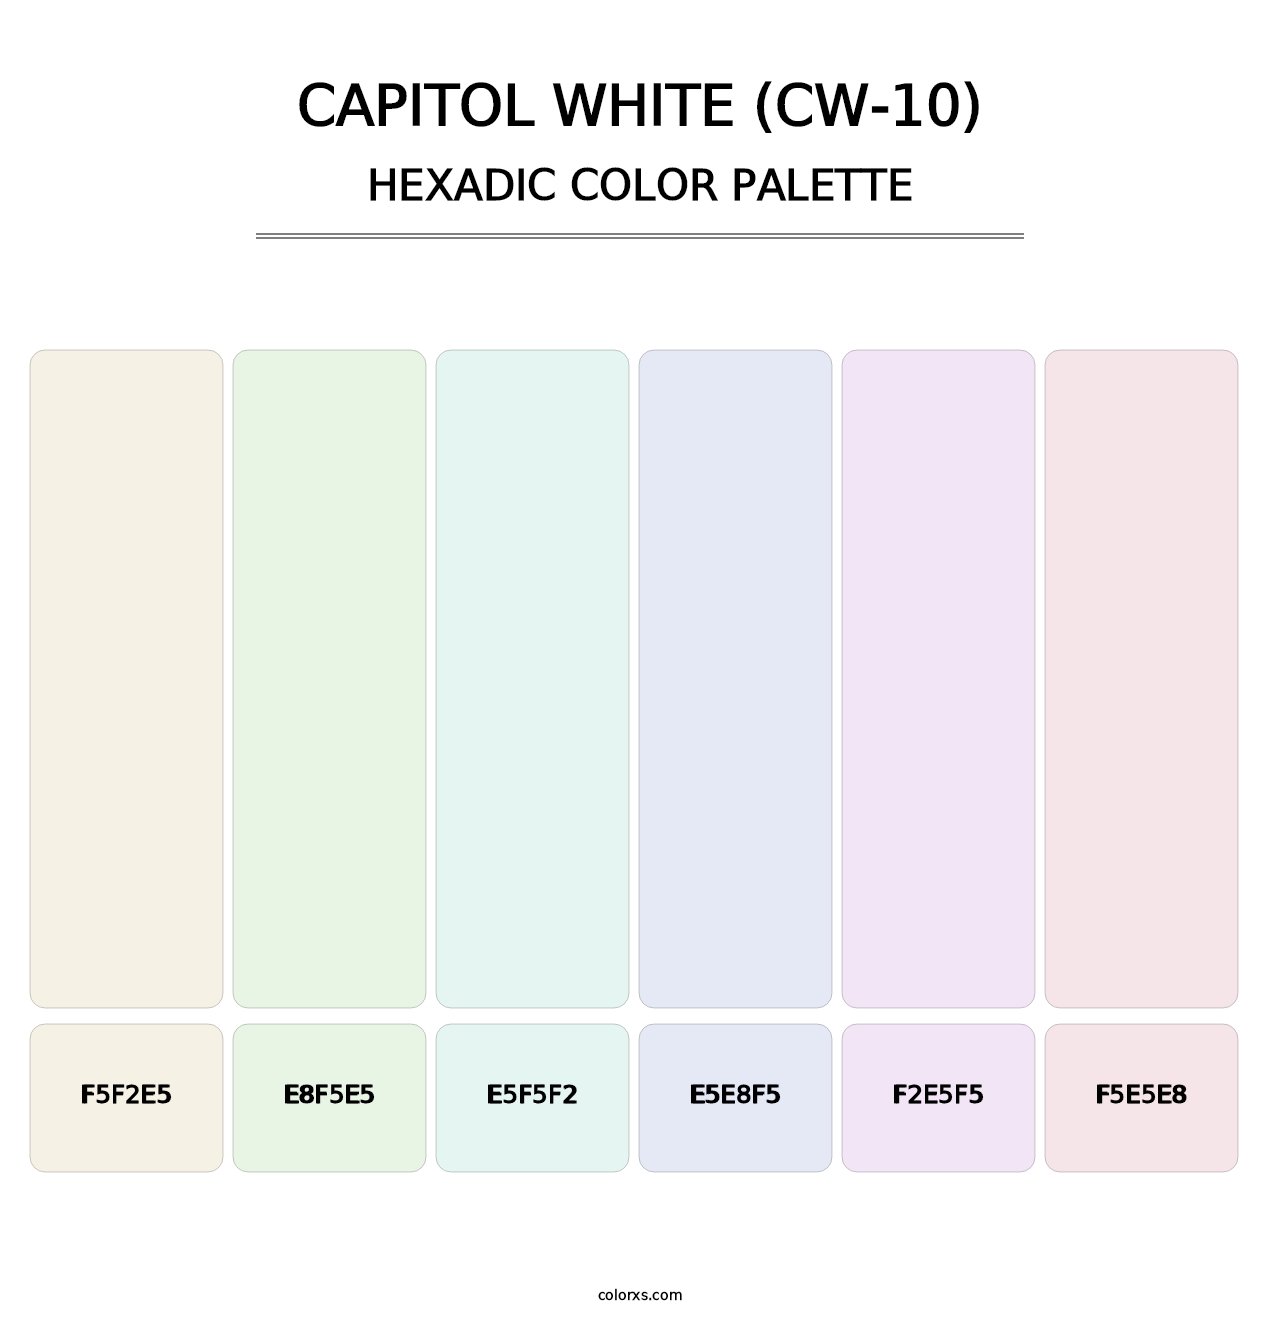 Capitol White (CW-10) - Hexadic Color Palette